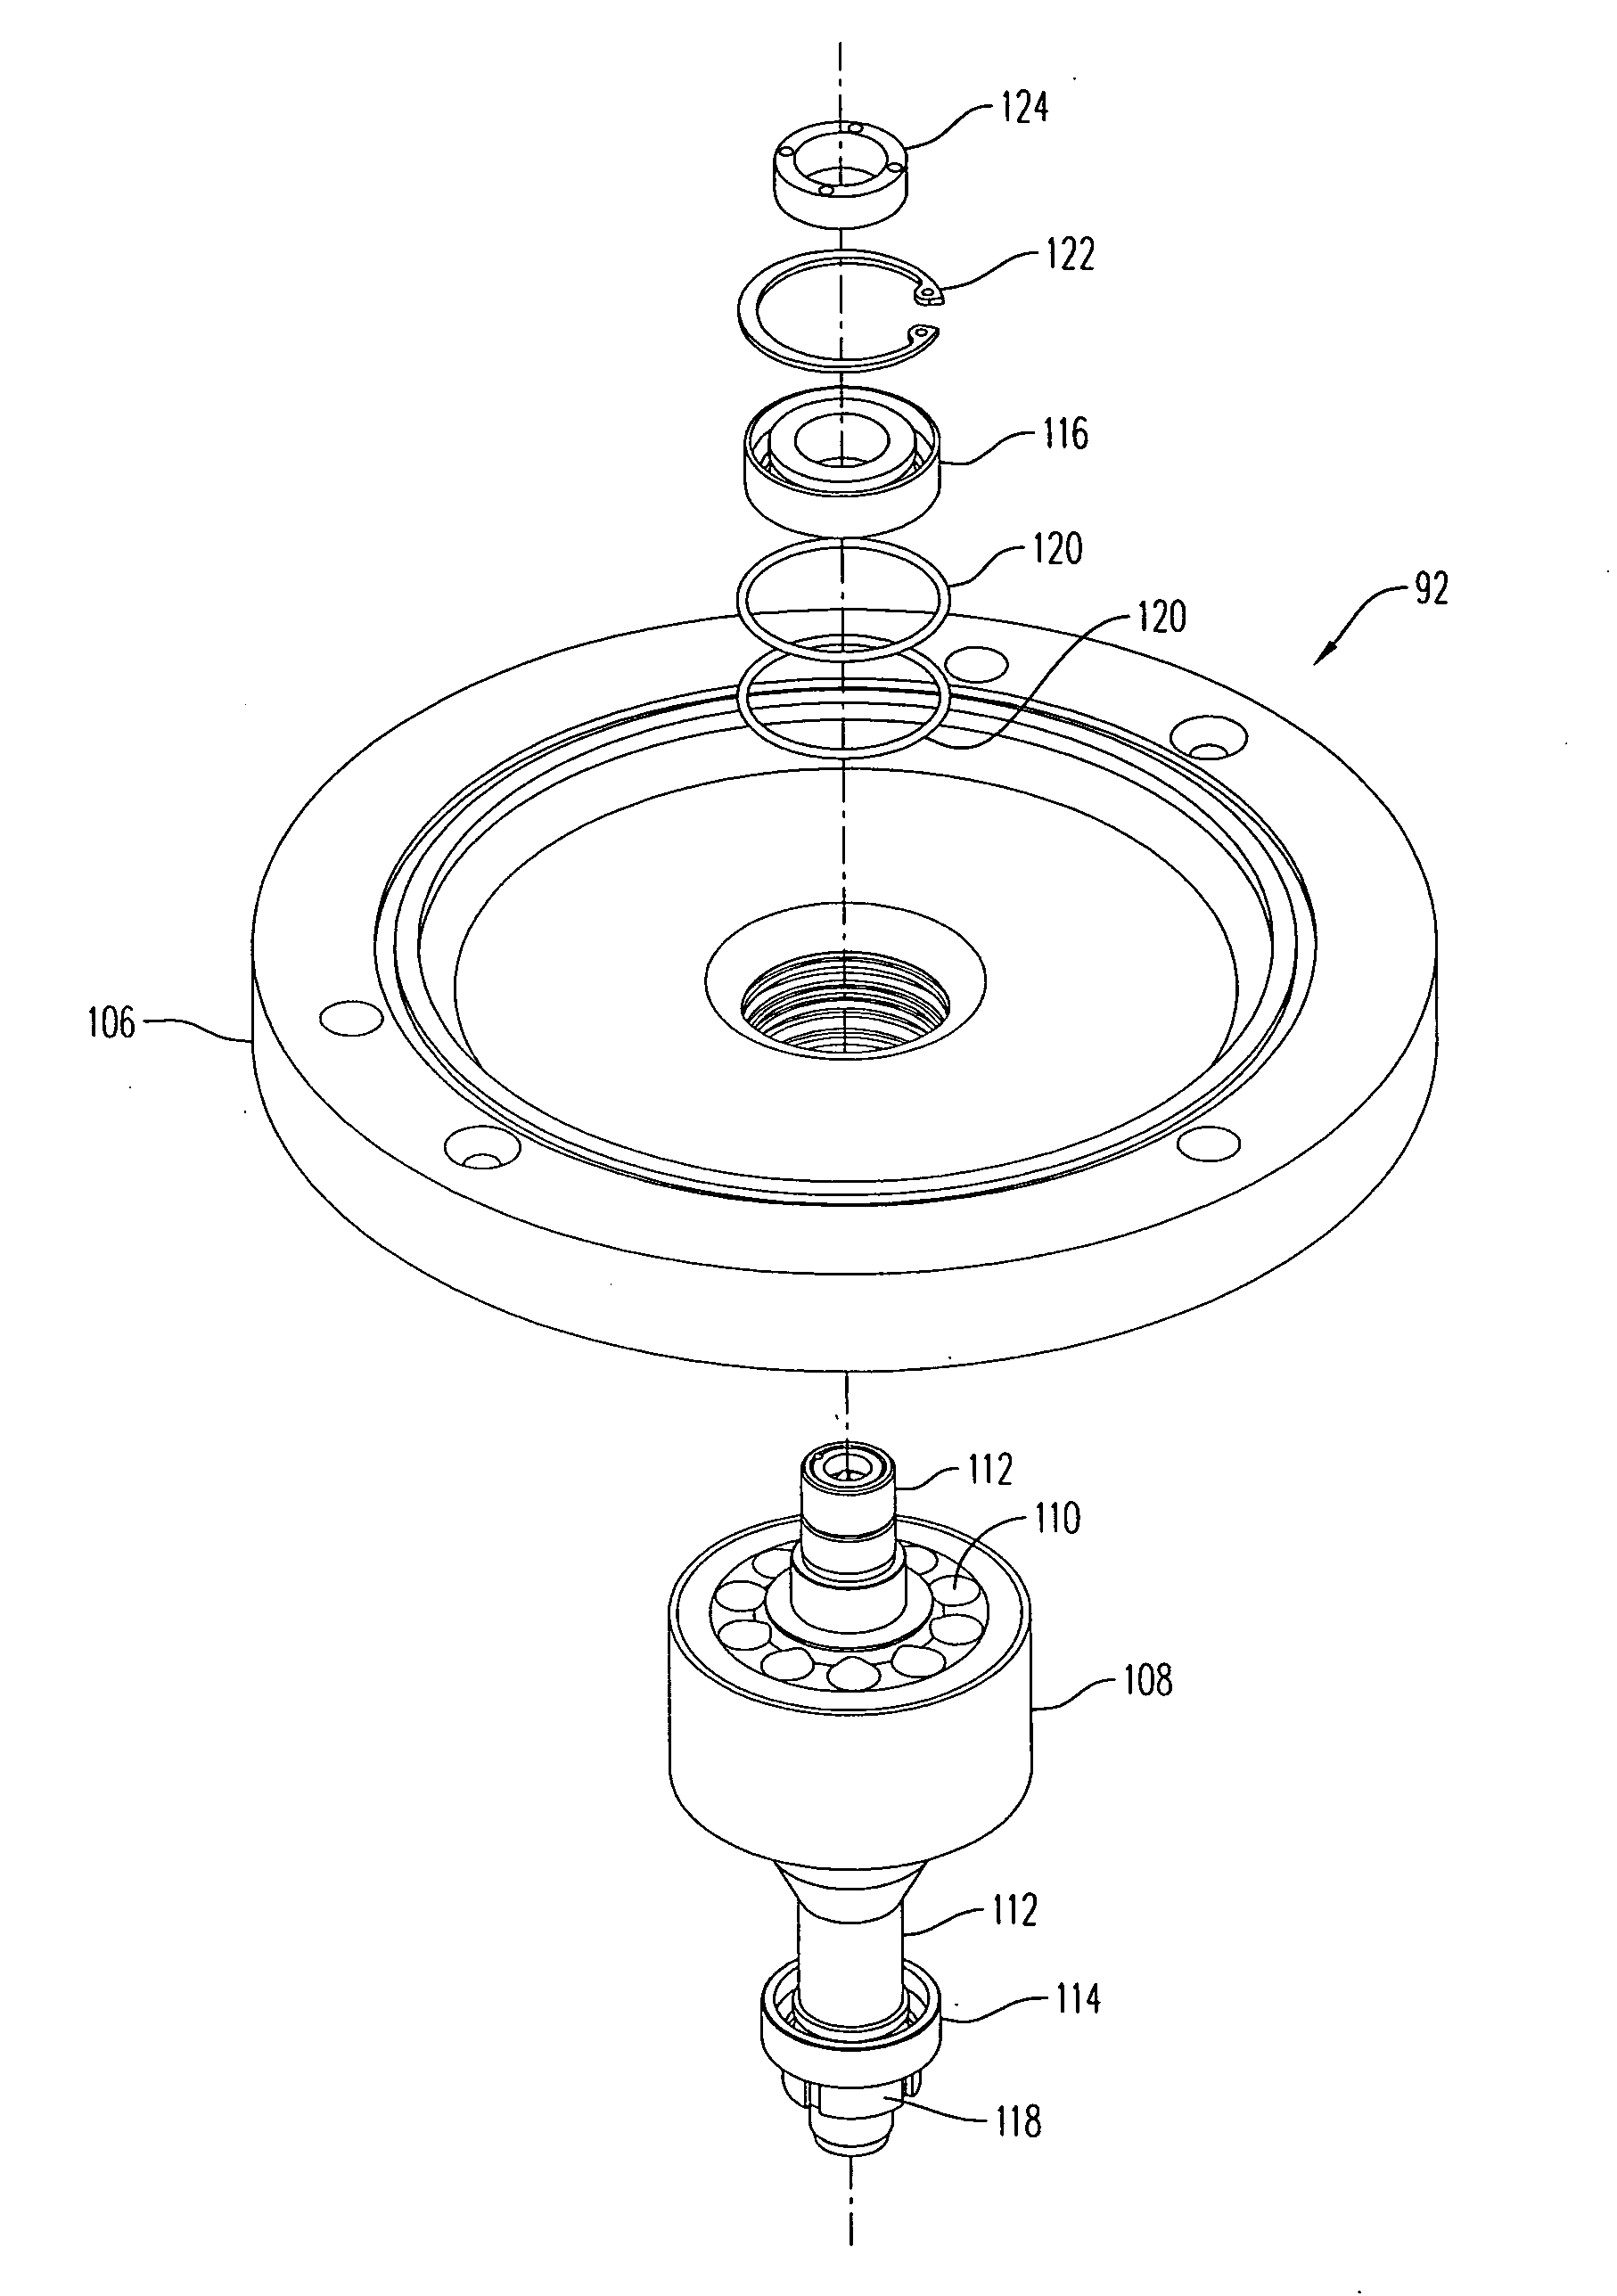 Continuous flow ultra-centrifugation systems